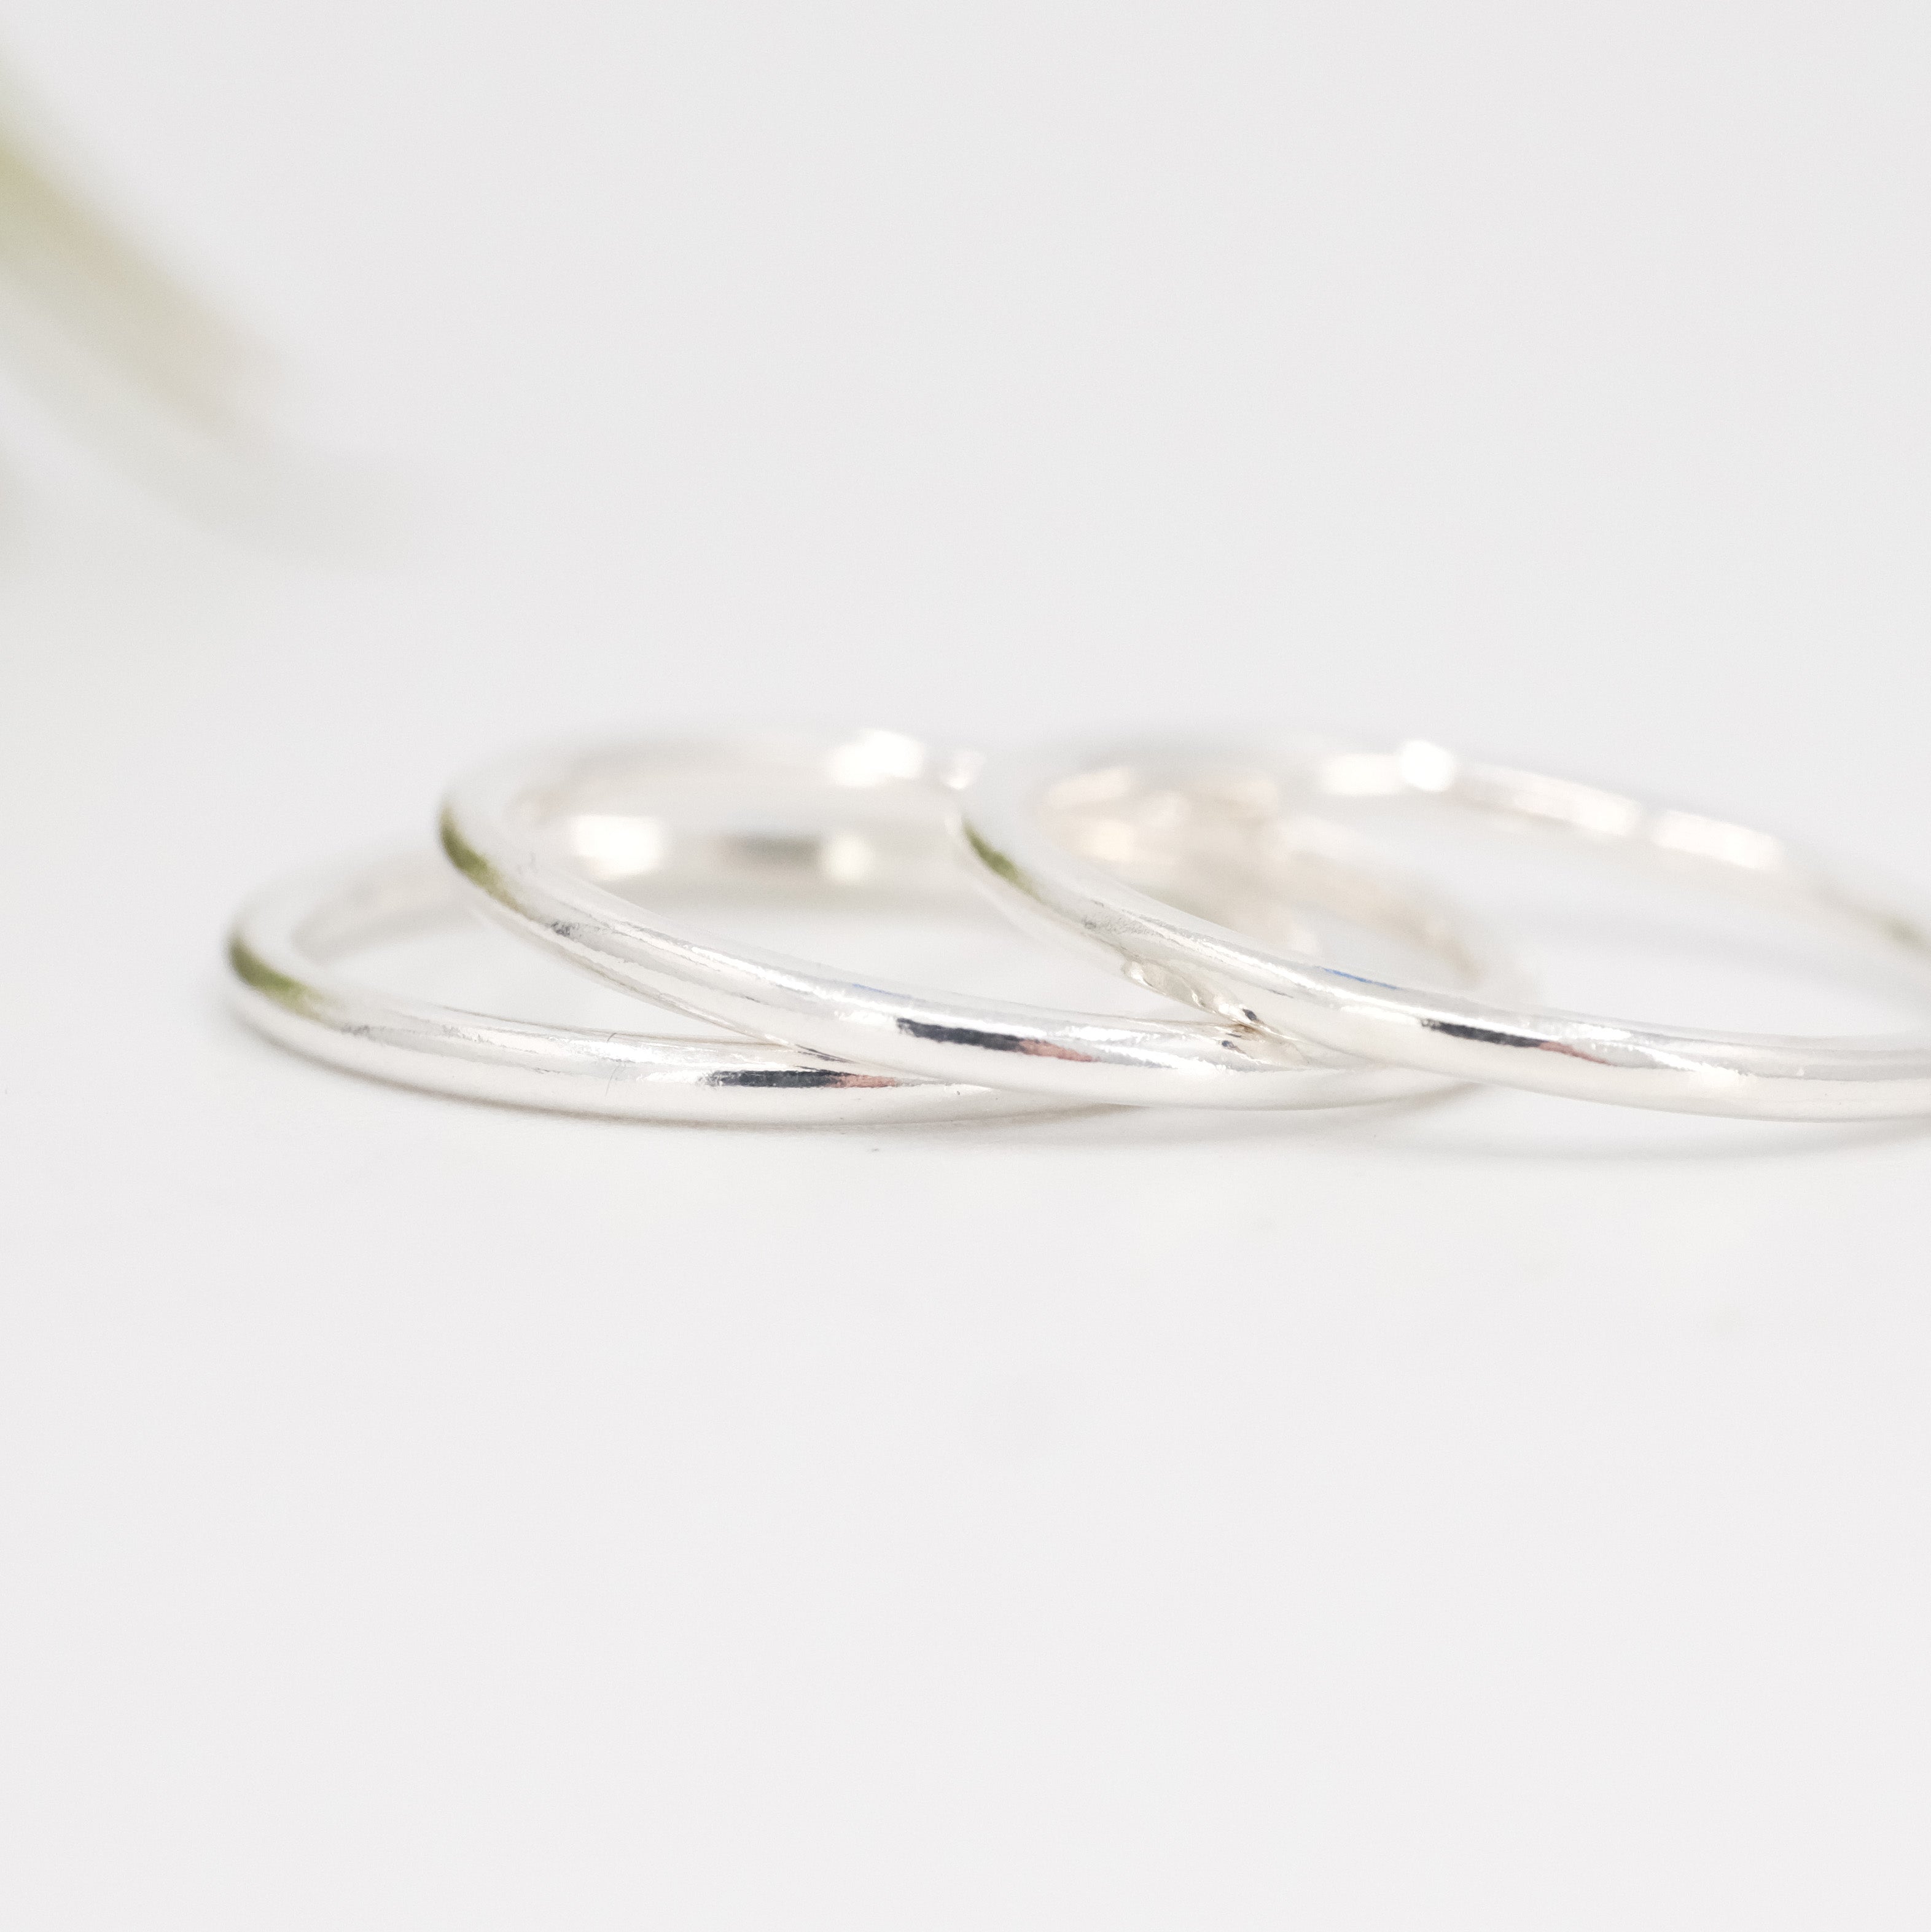 Simple Sterling Ring